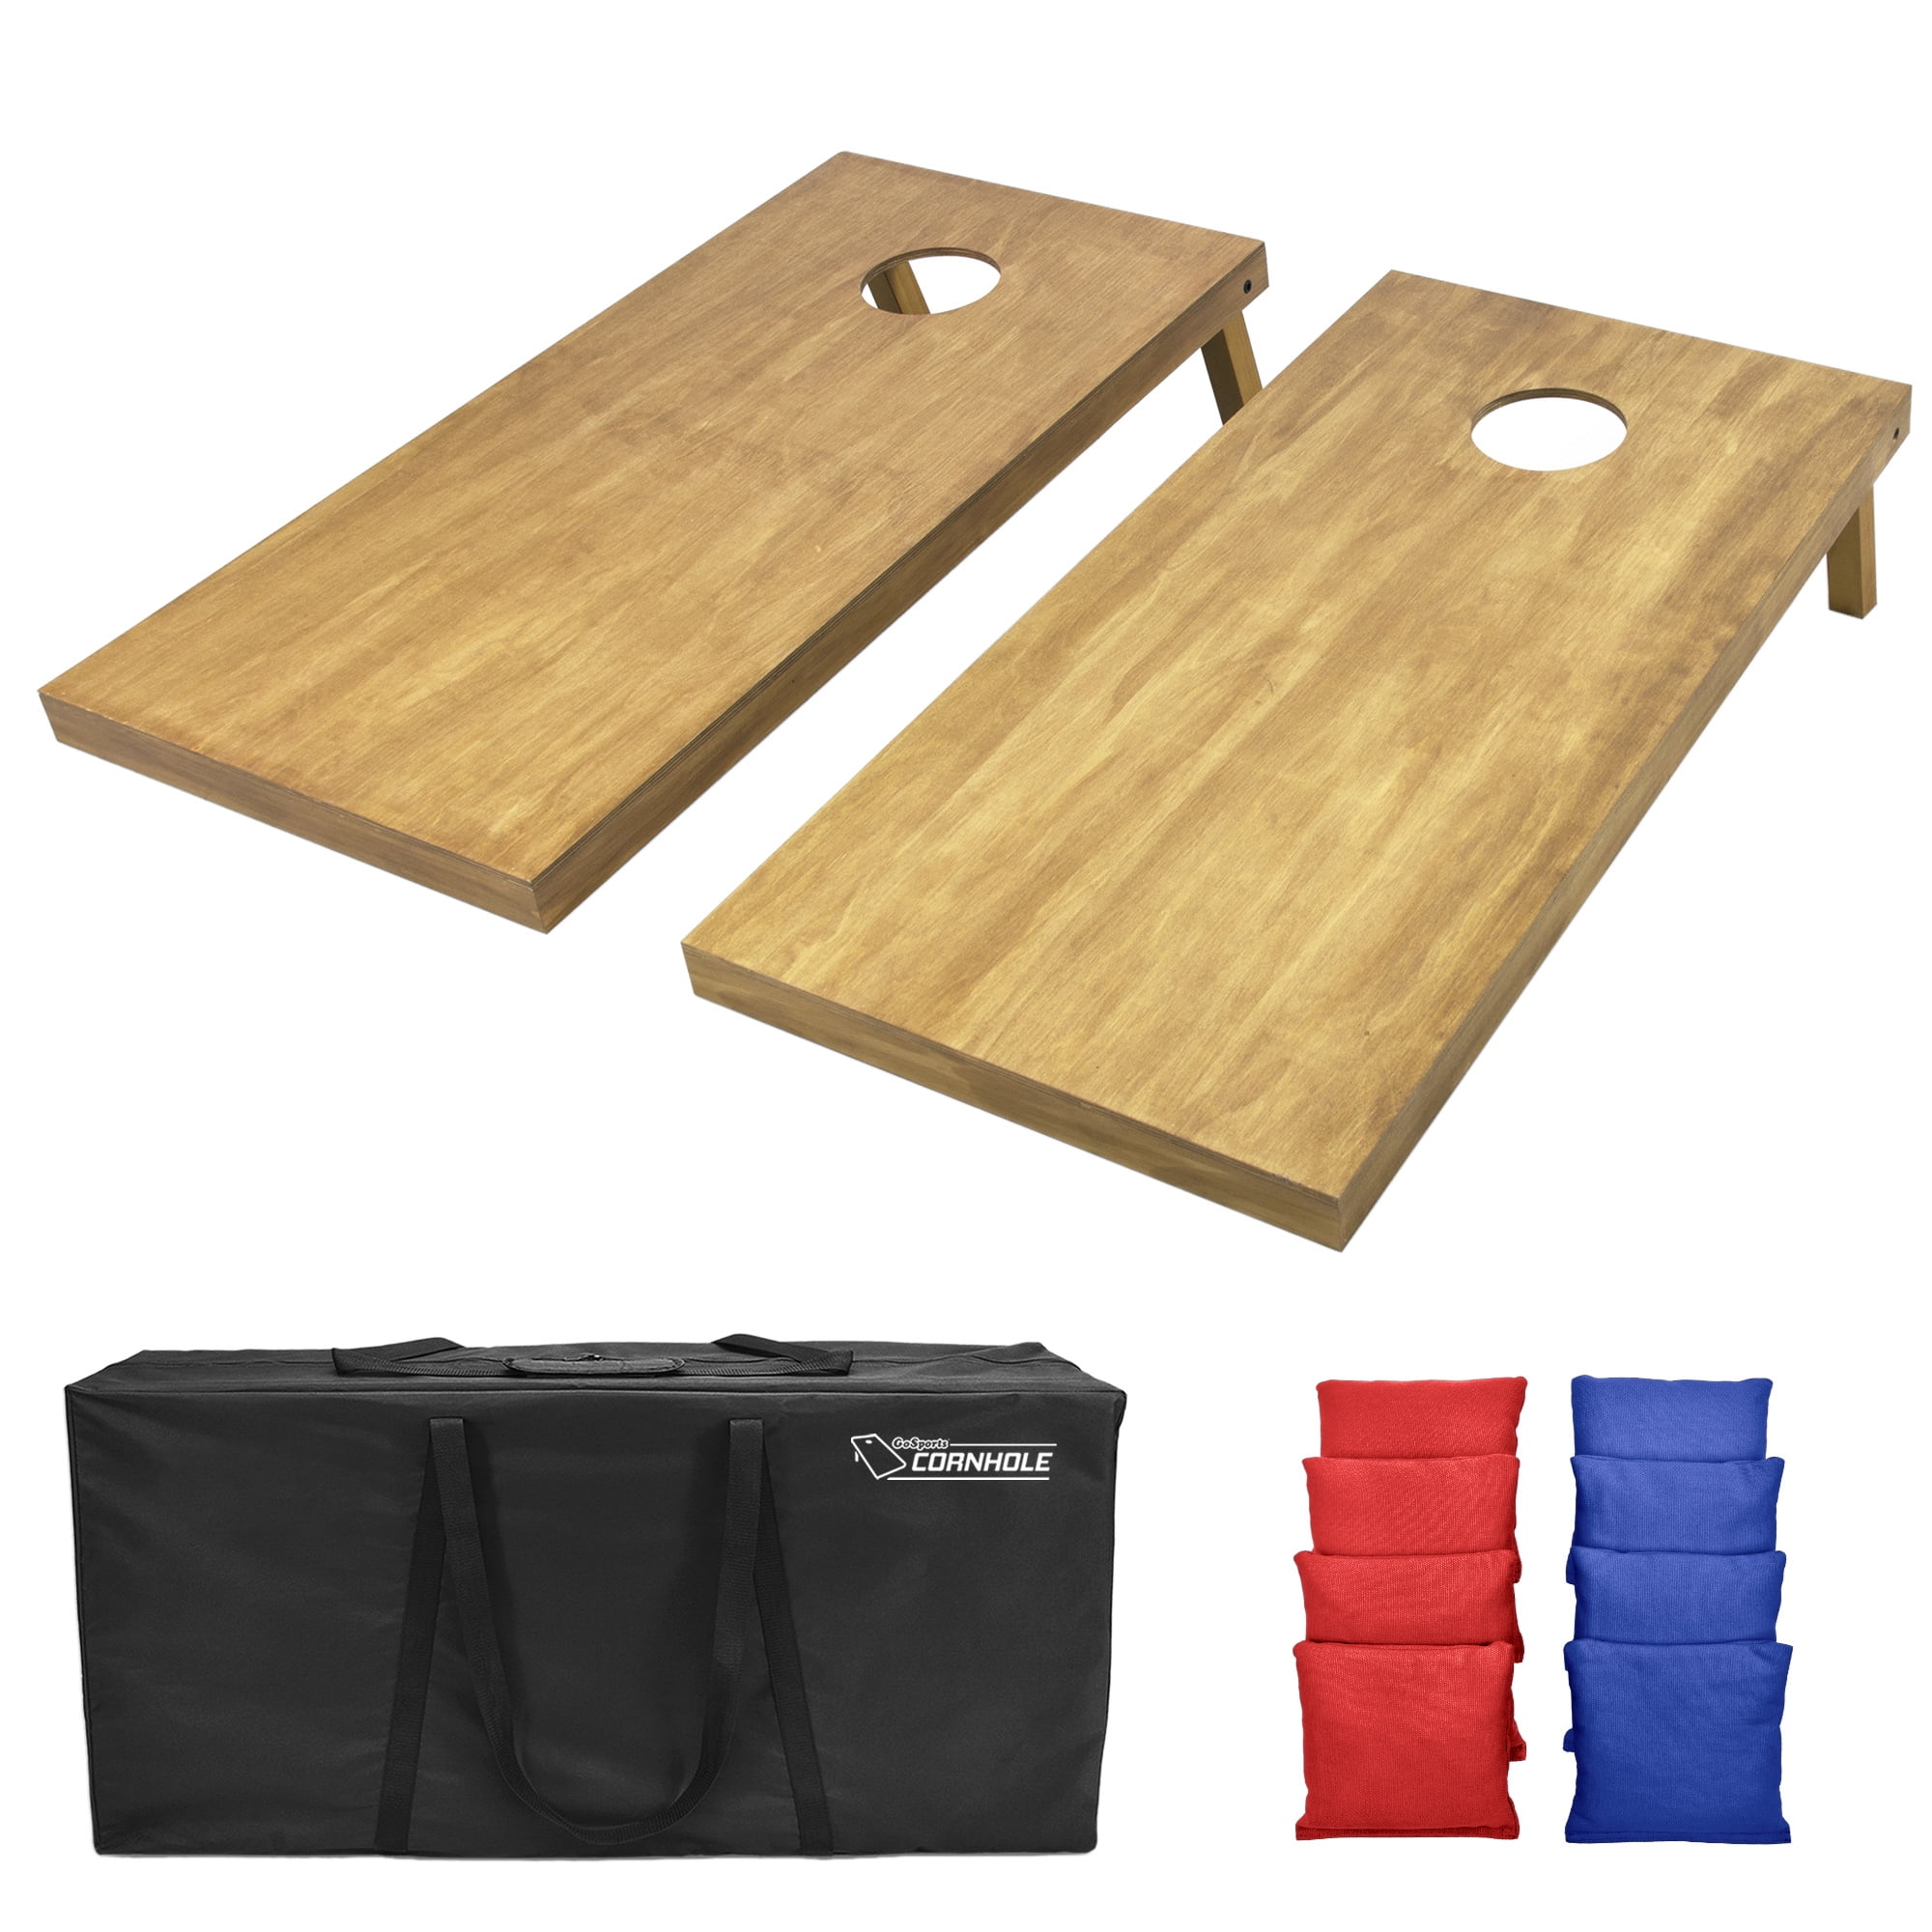 GoSports 4'x2' Regulation Size Wooden Cornhole Set with Light Brown Finish  Includes Carrying Case and Red and Blue Bean Bags Set